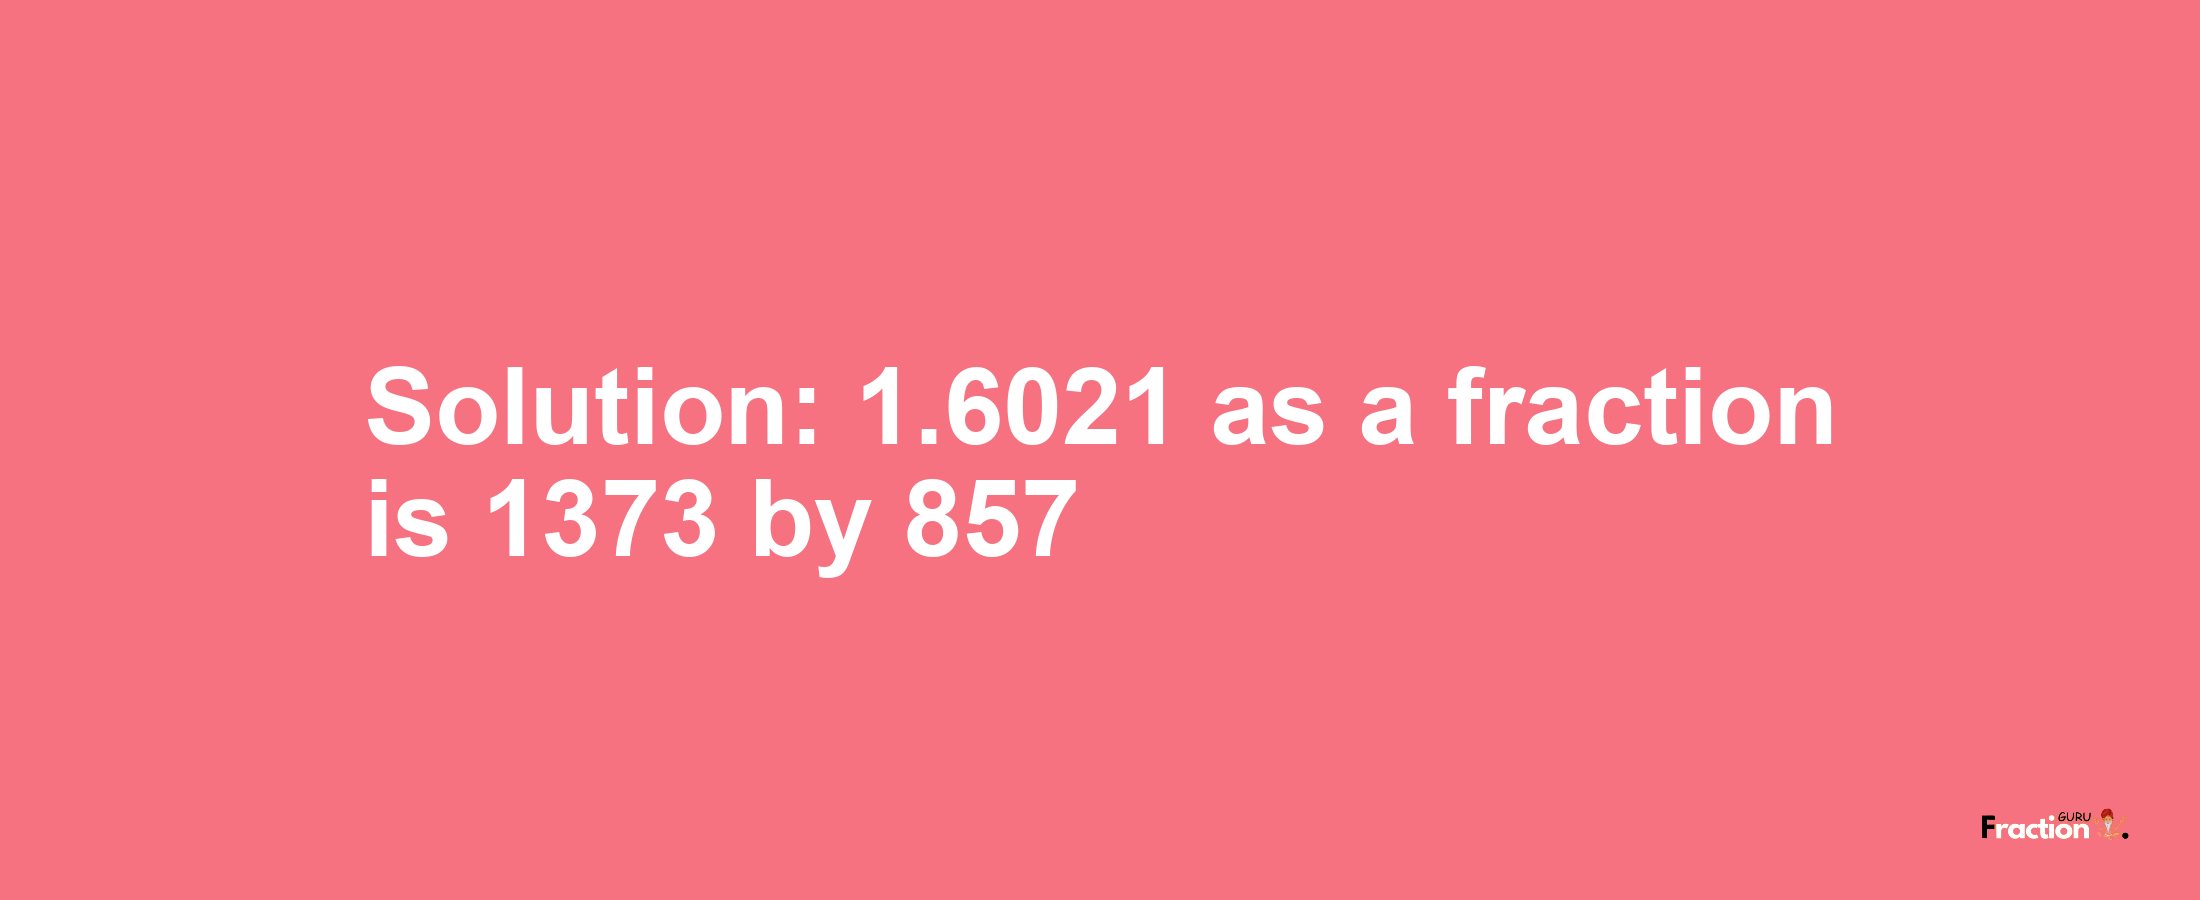 Solution:1.6021 as a fraction is 1373/857